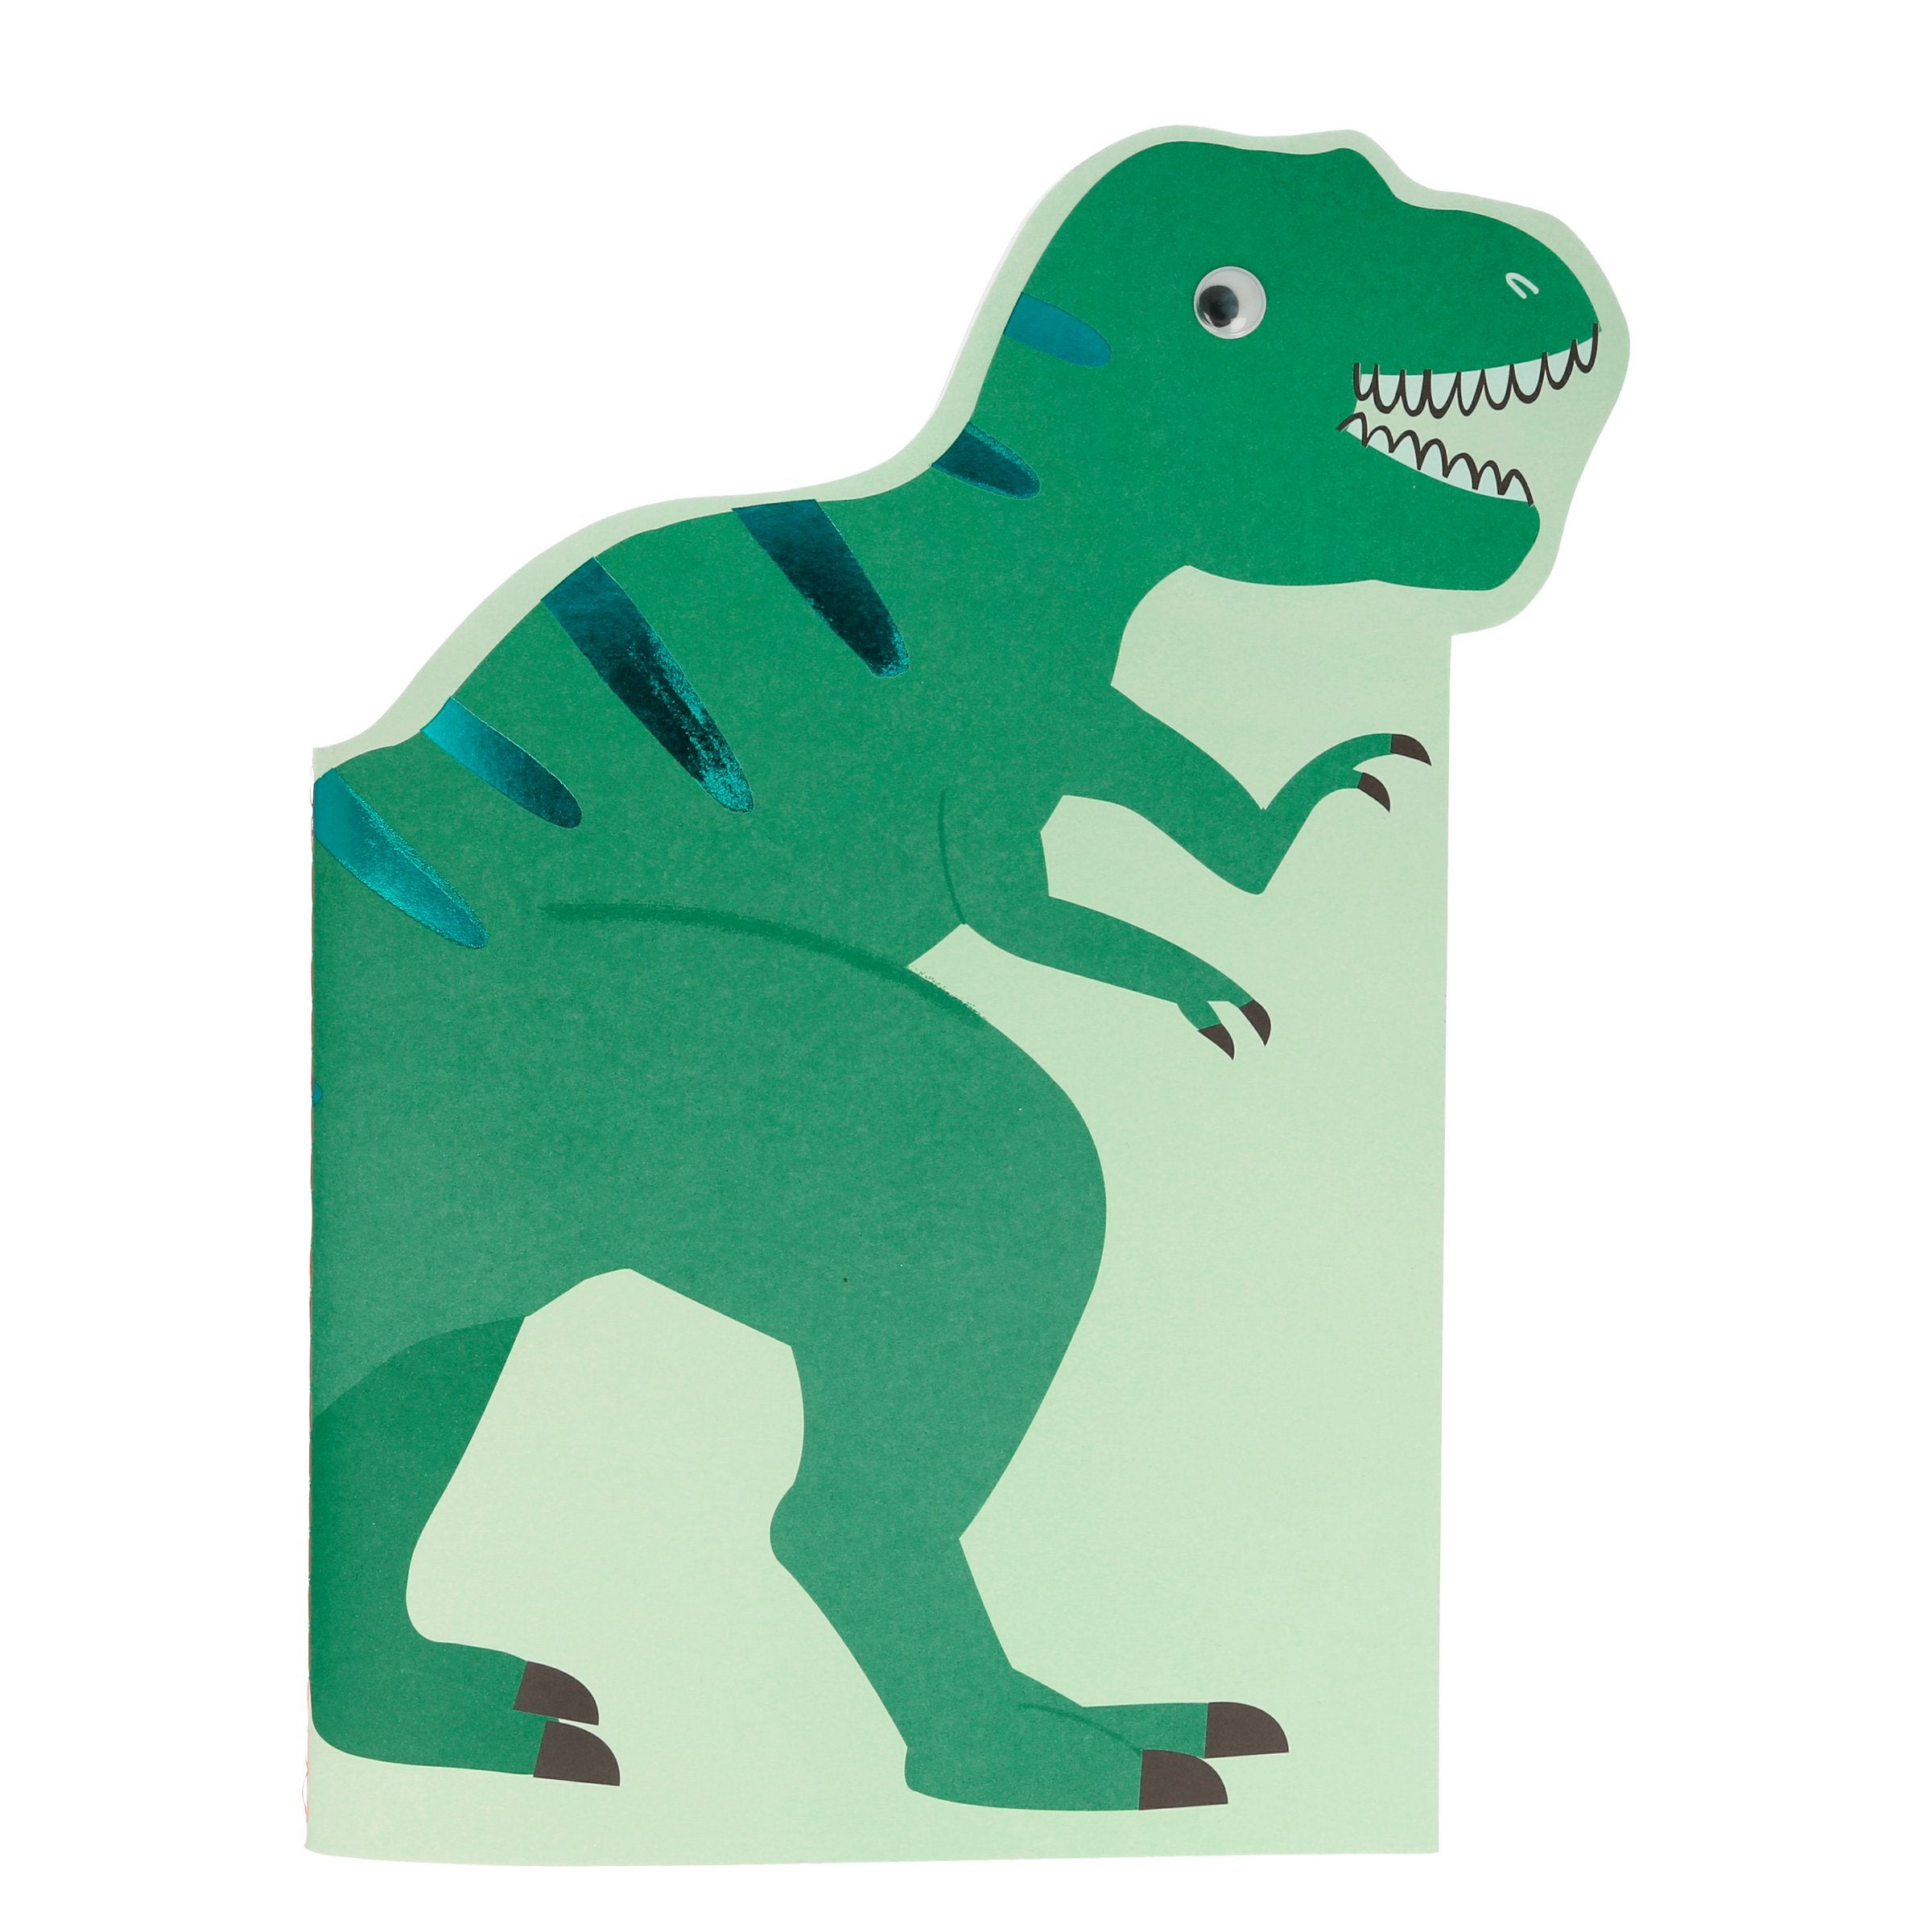 Creative kids who love dinosaurs will enjoy our sketch book filled with stickers, perfect to pop into dinosaur party bags.